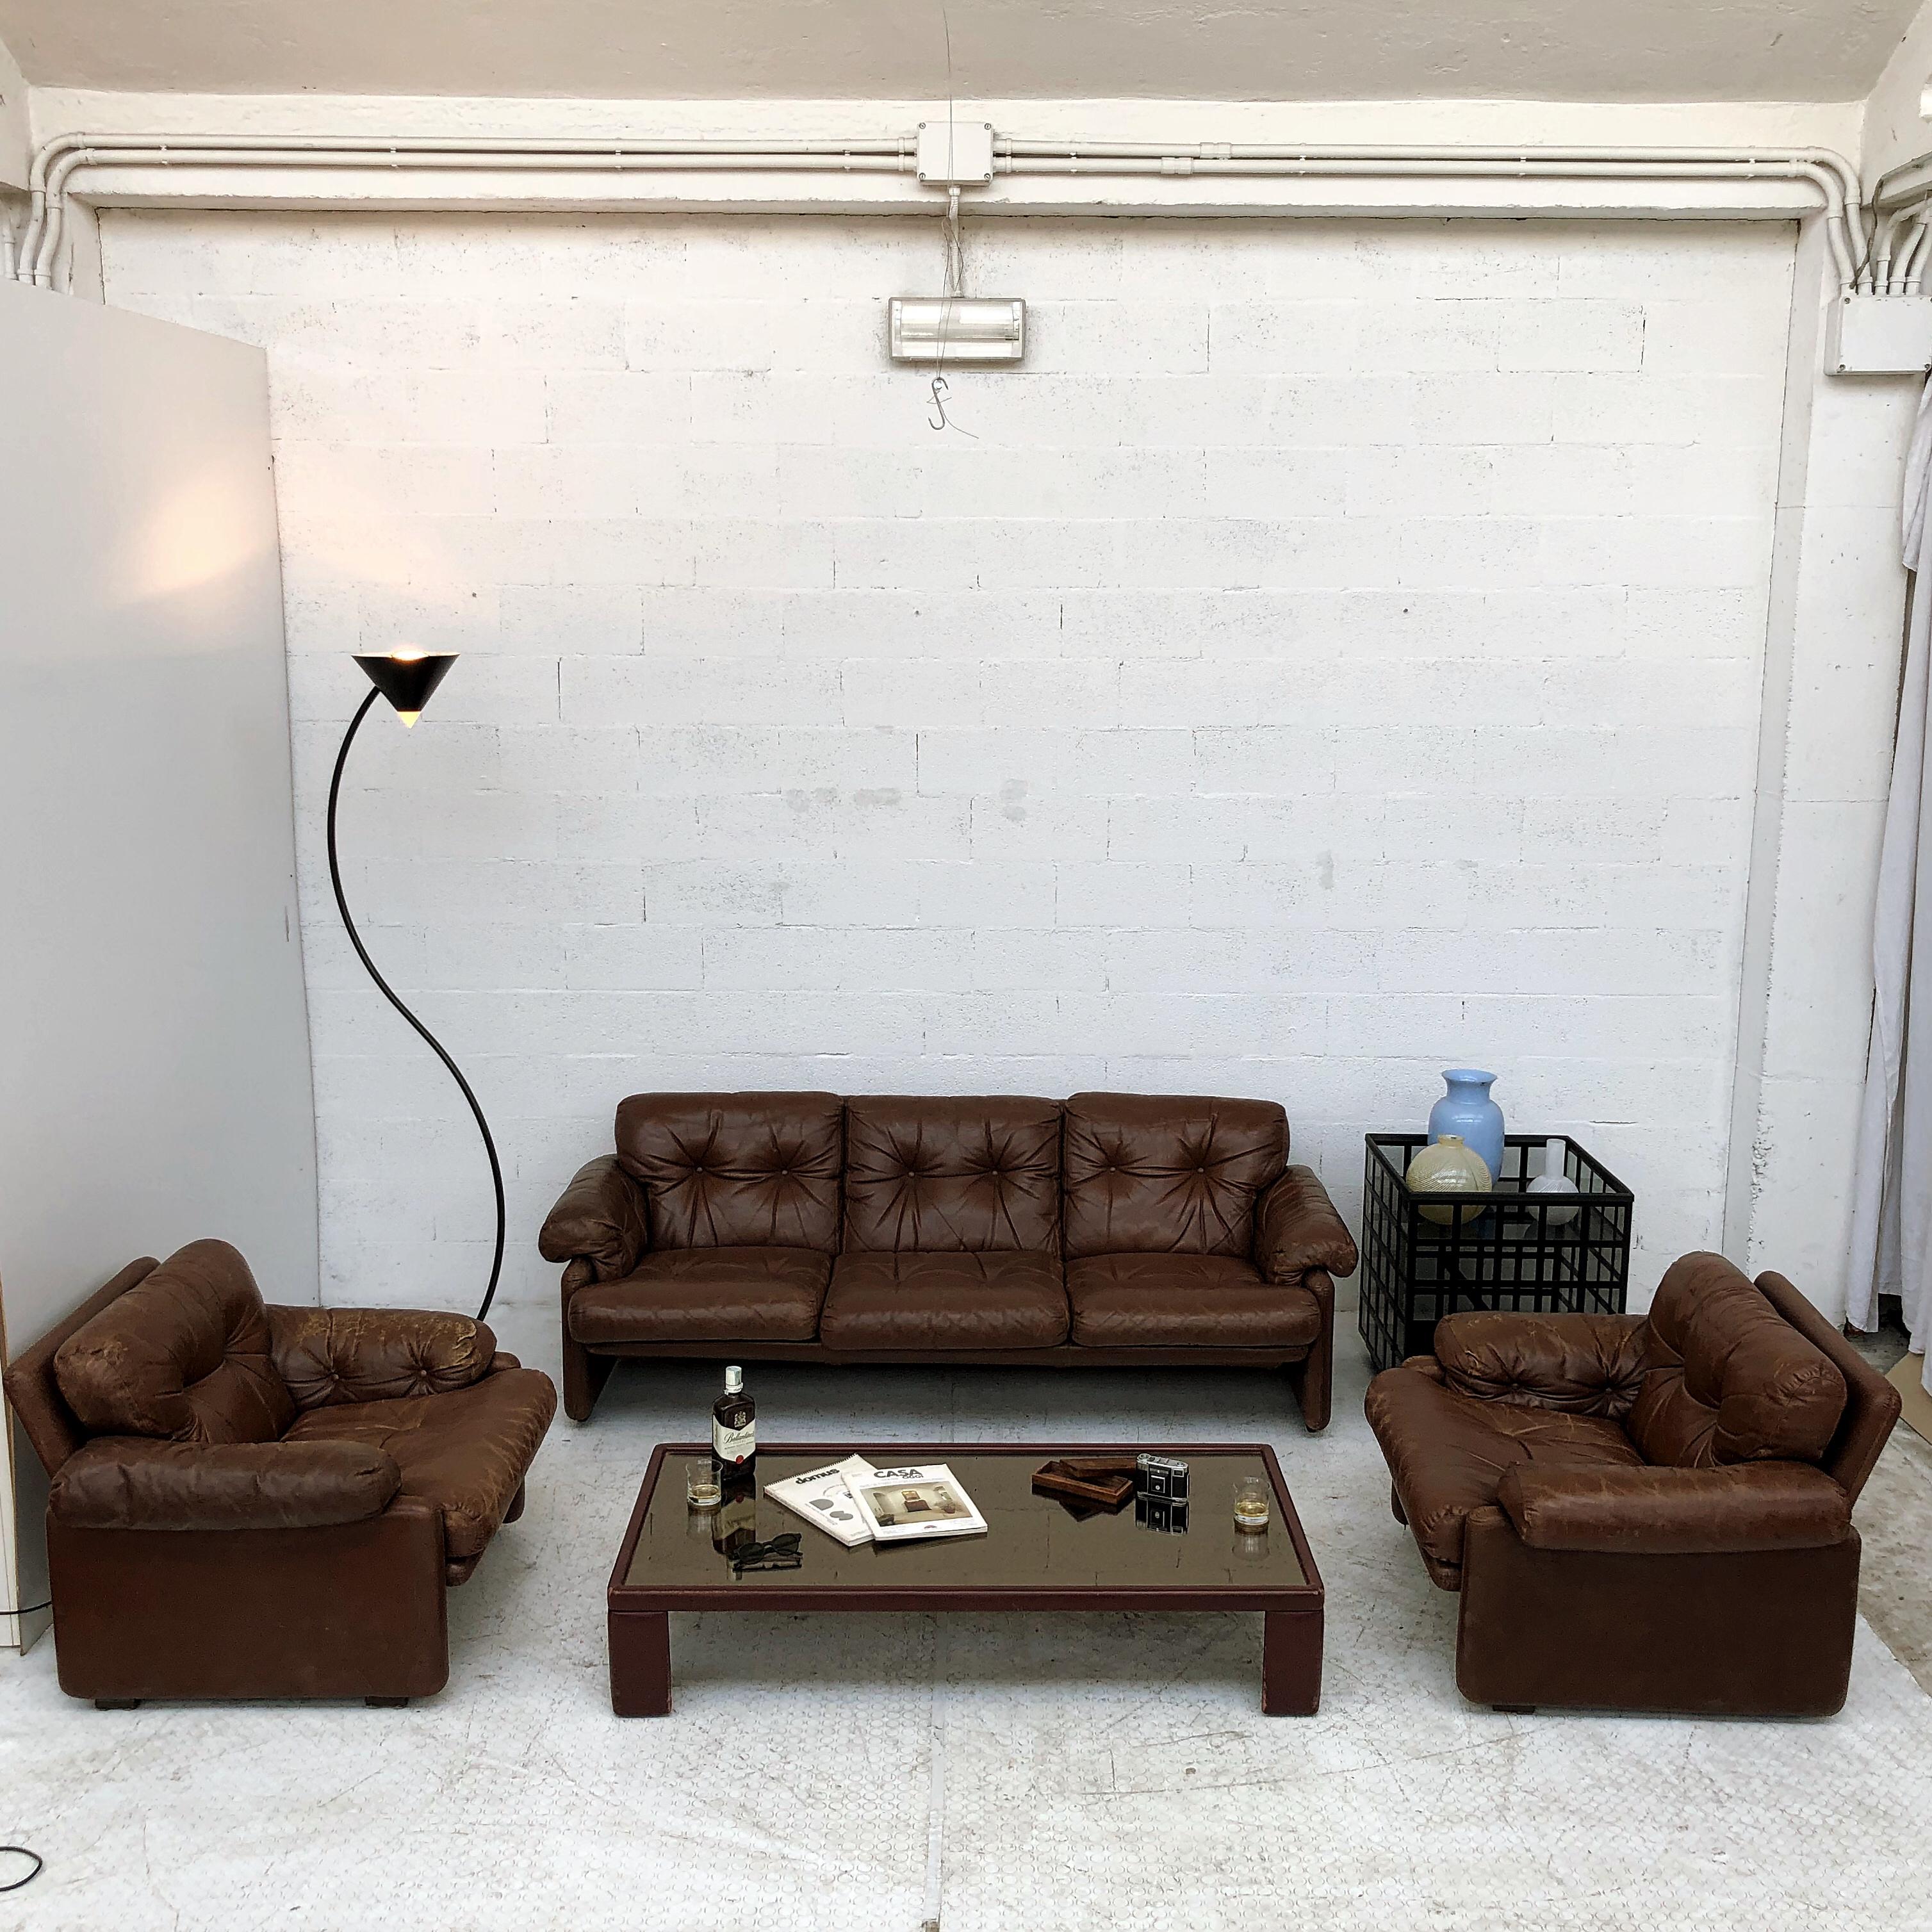 Brown leather “Coronado” living room set composed of two armchairs and one three-seat sofa, designed by Afra and Tobia Scarpa in 1966 and produced by the Italian manufacturer C&B Italia in 1969.
The Coronado project is one of the foundation projects